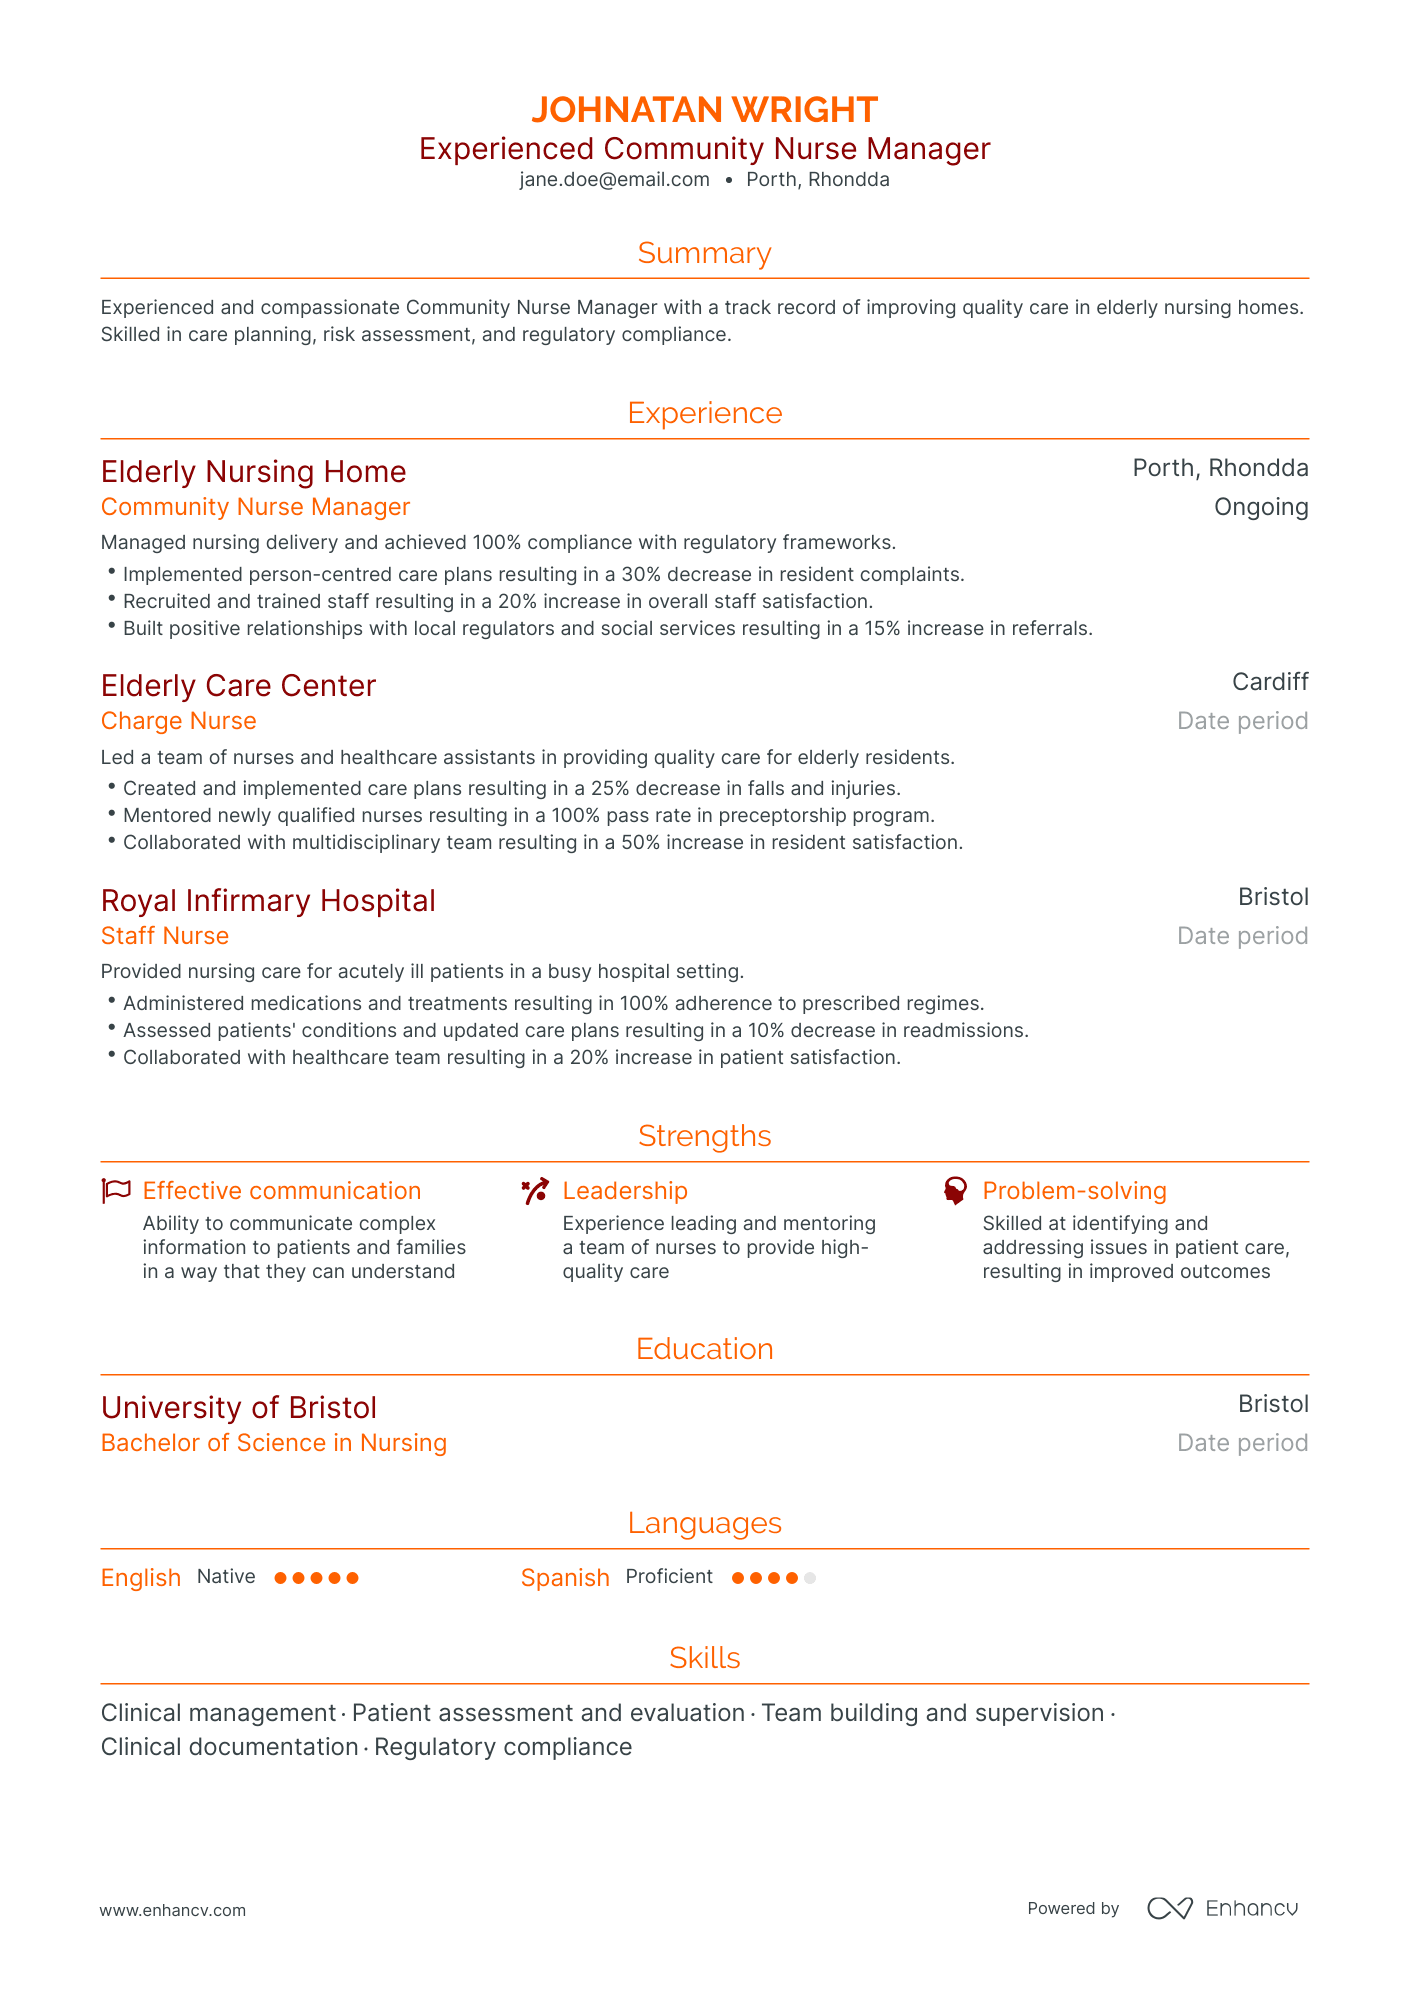 Traditional Nurse Manager Resume Template